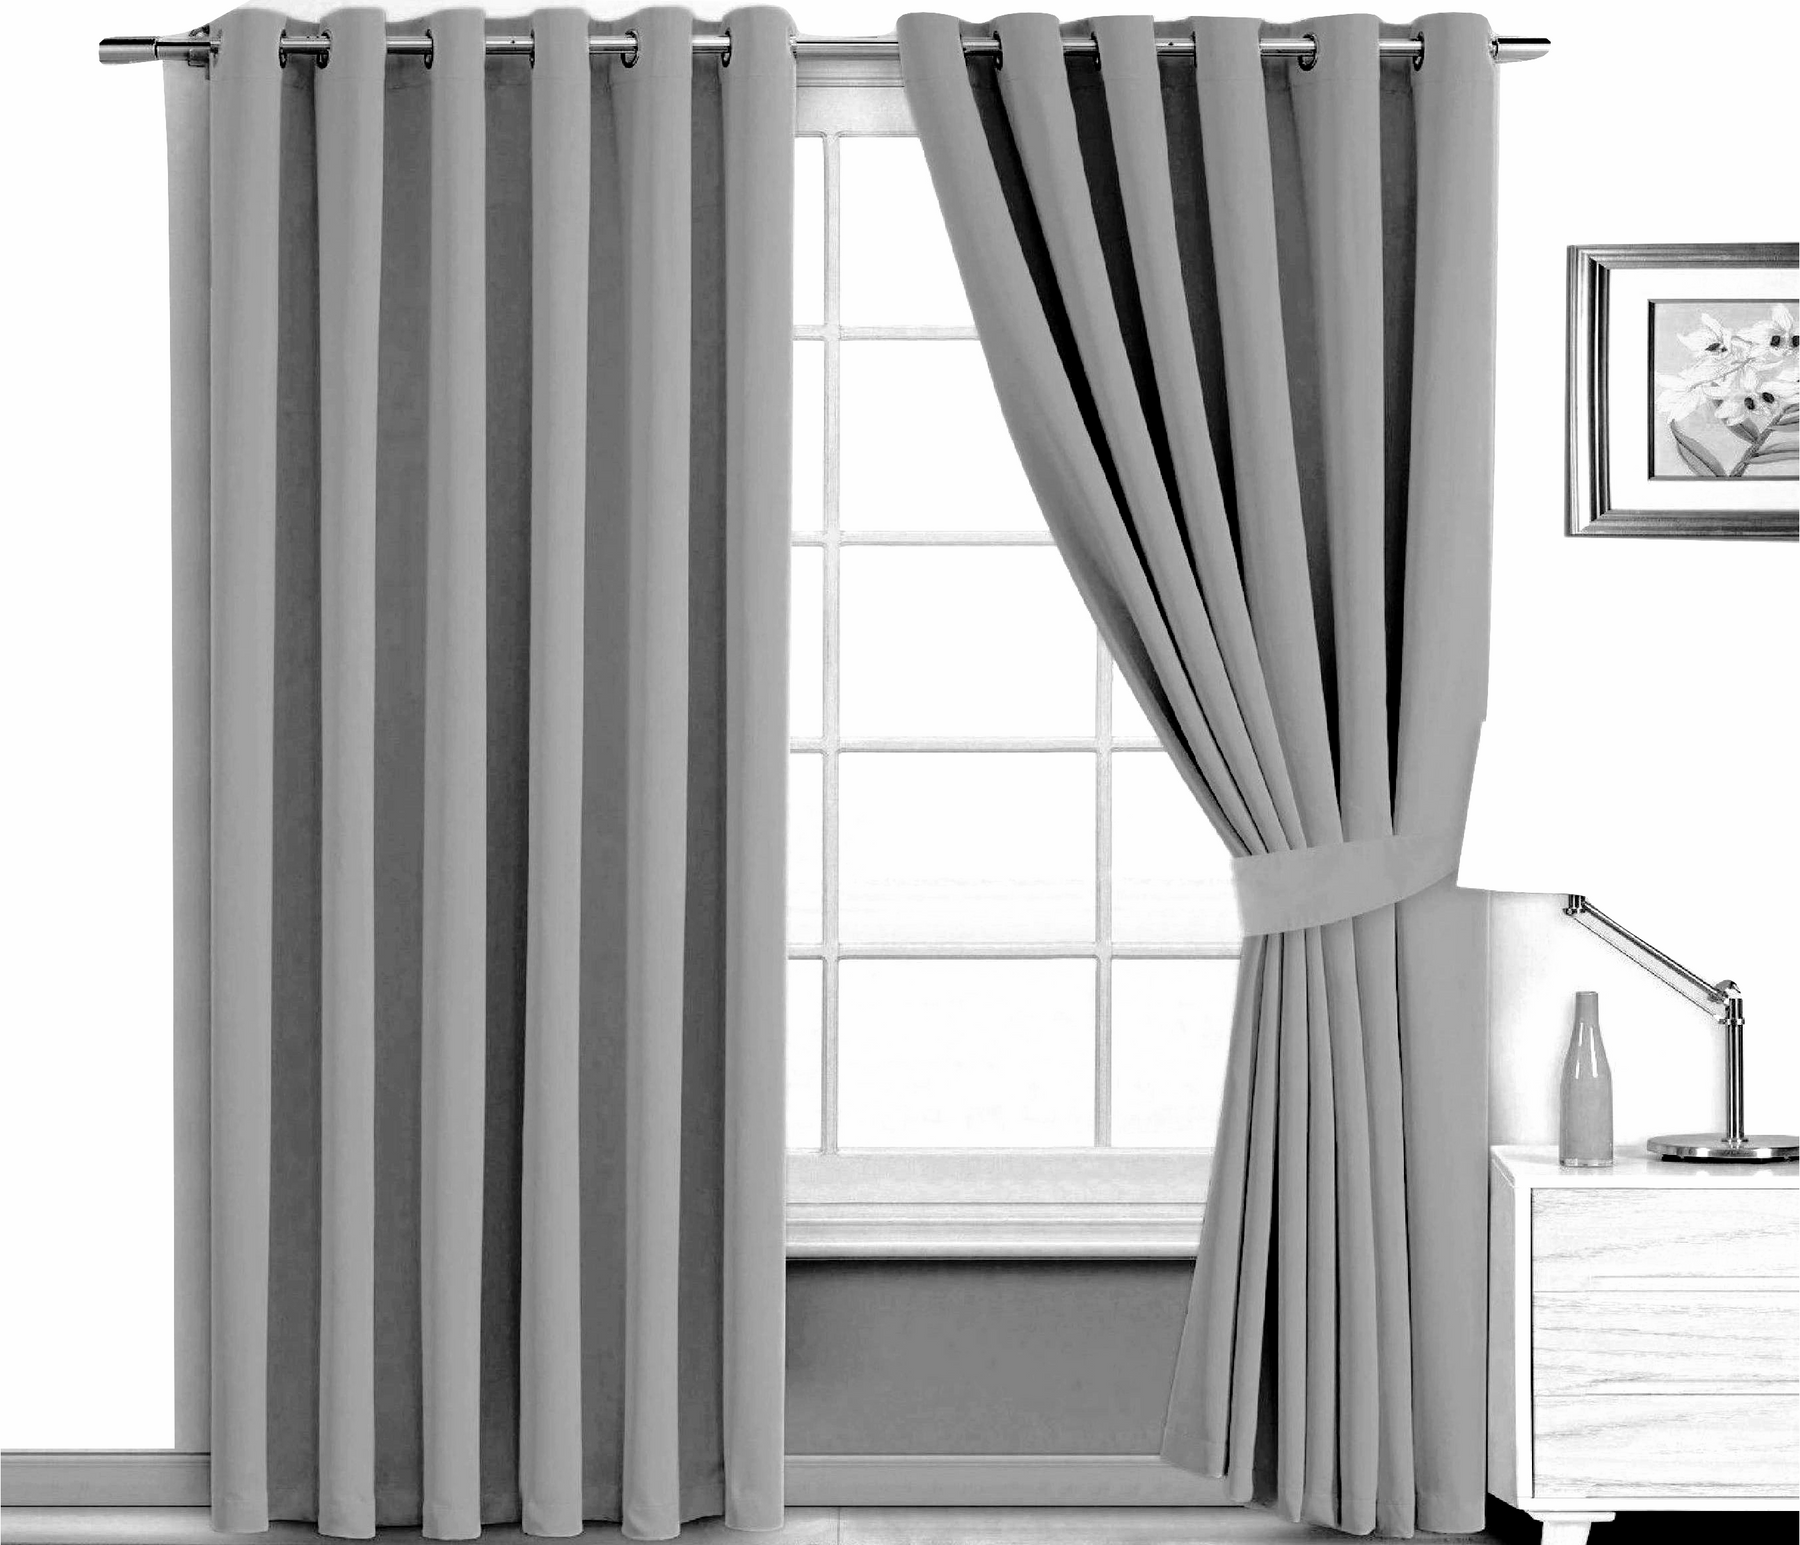 Pair of Blackout Eyelet Curtains Grey 66" x 90" Two Tie Backs Included